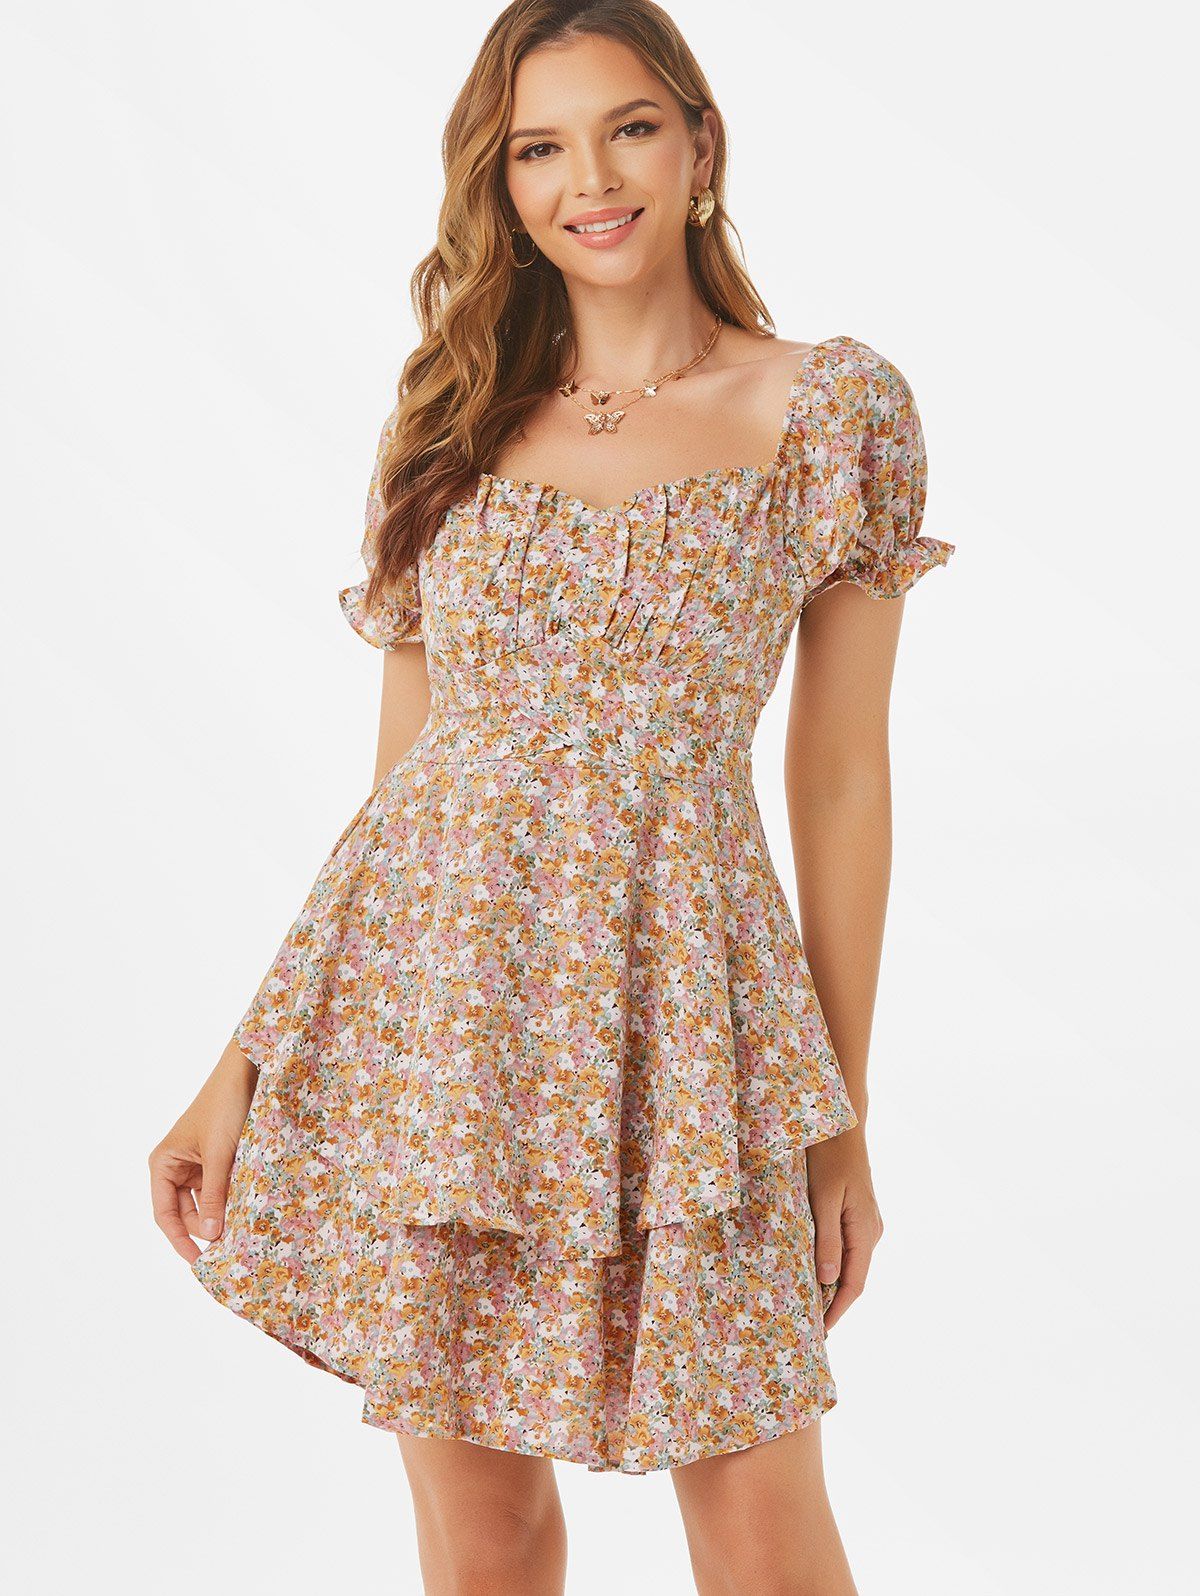 Ditsy Floral Cottagecore Chic Dress